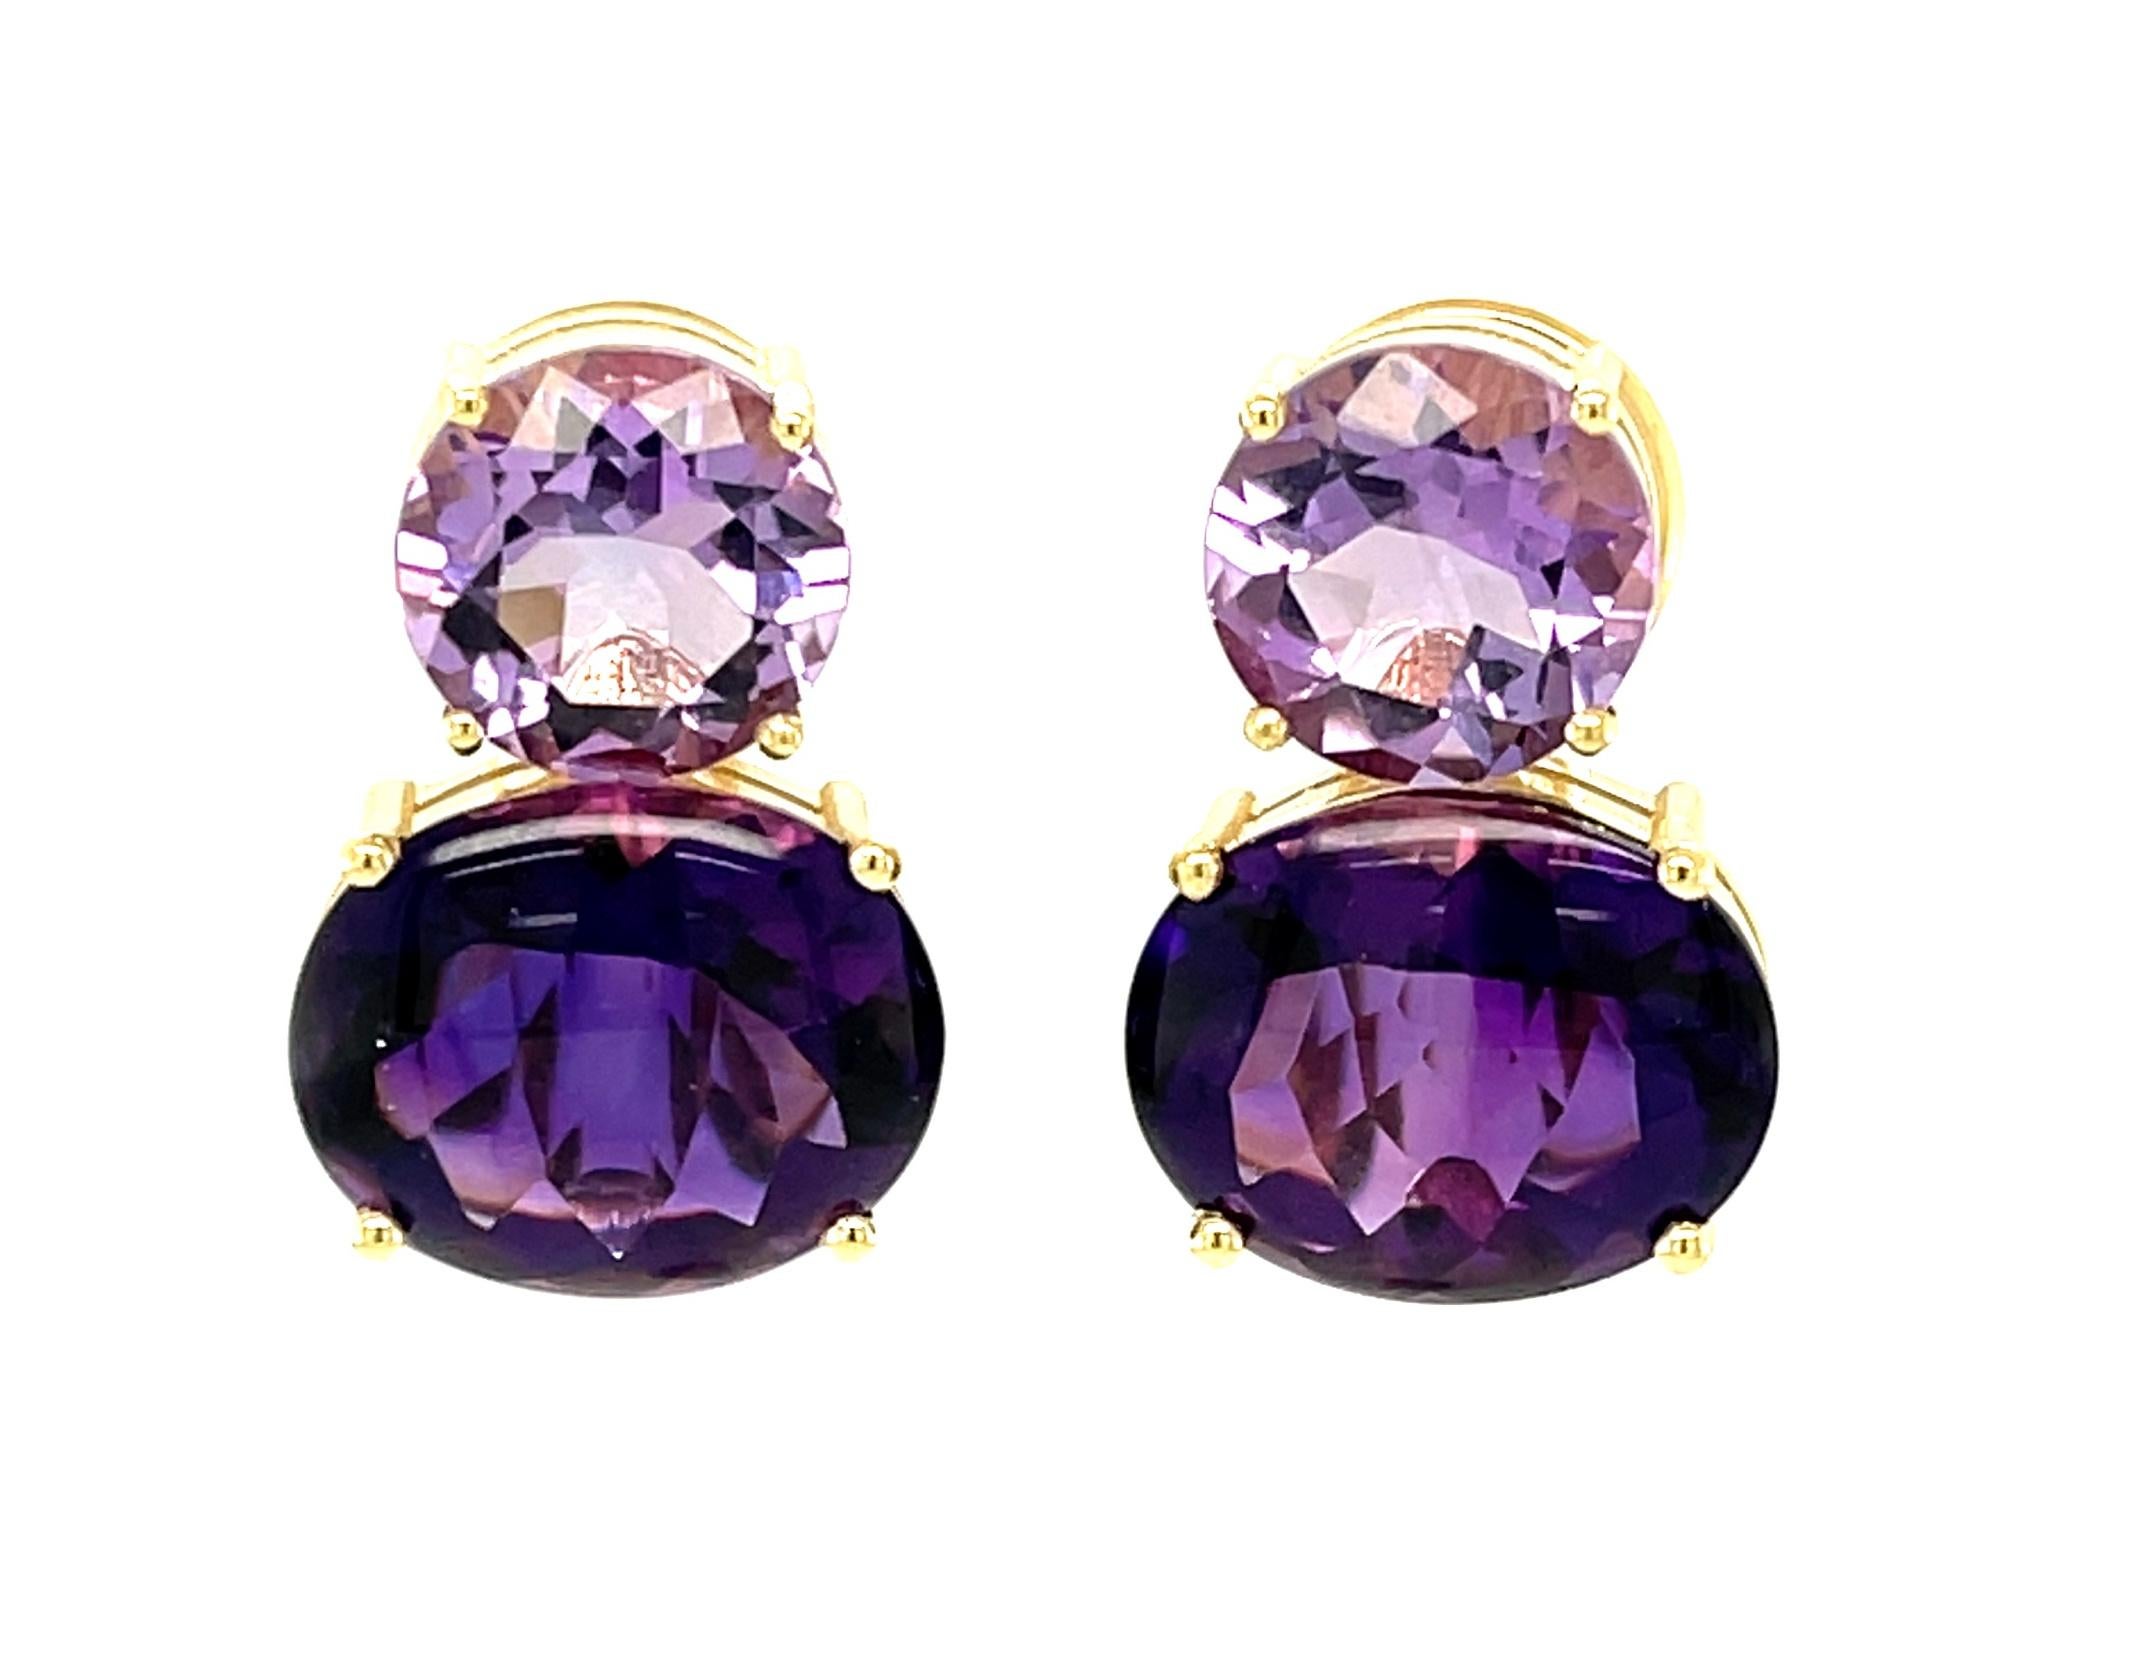 These pretty earrings feature amethyst gemstones in two different shades of purple! The round amethysts sparkle with delicate 